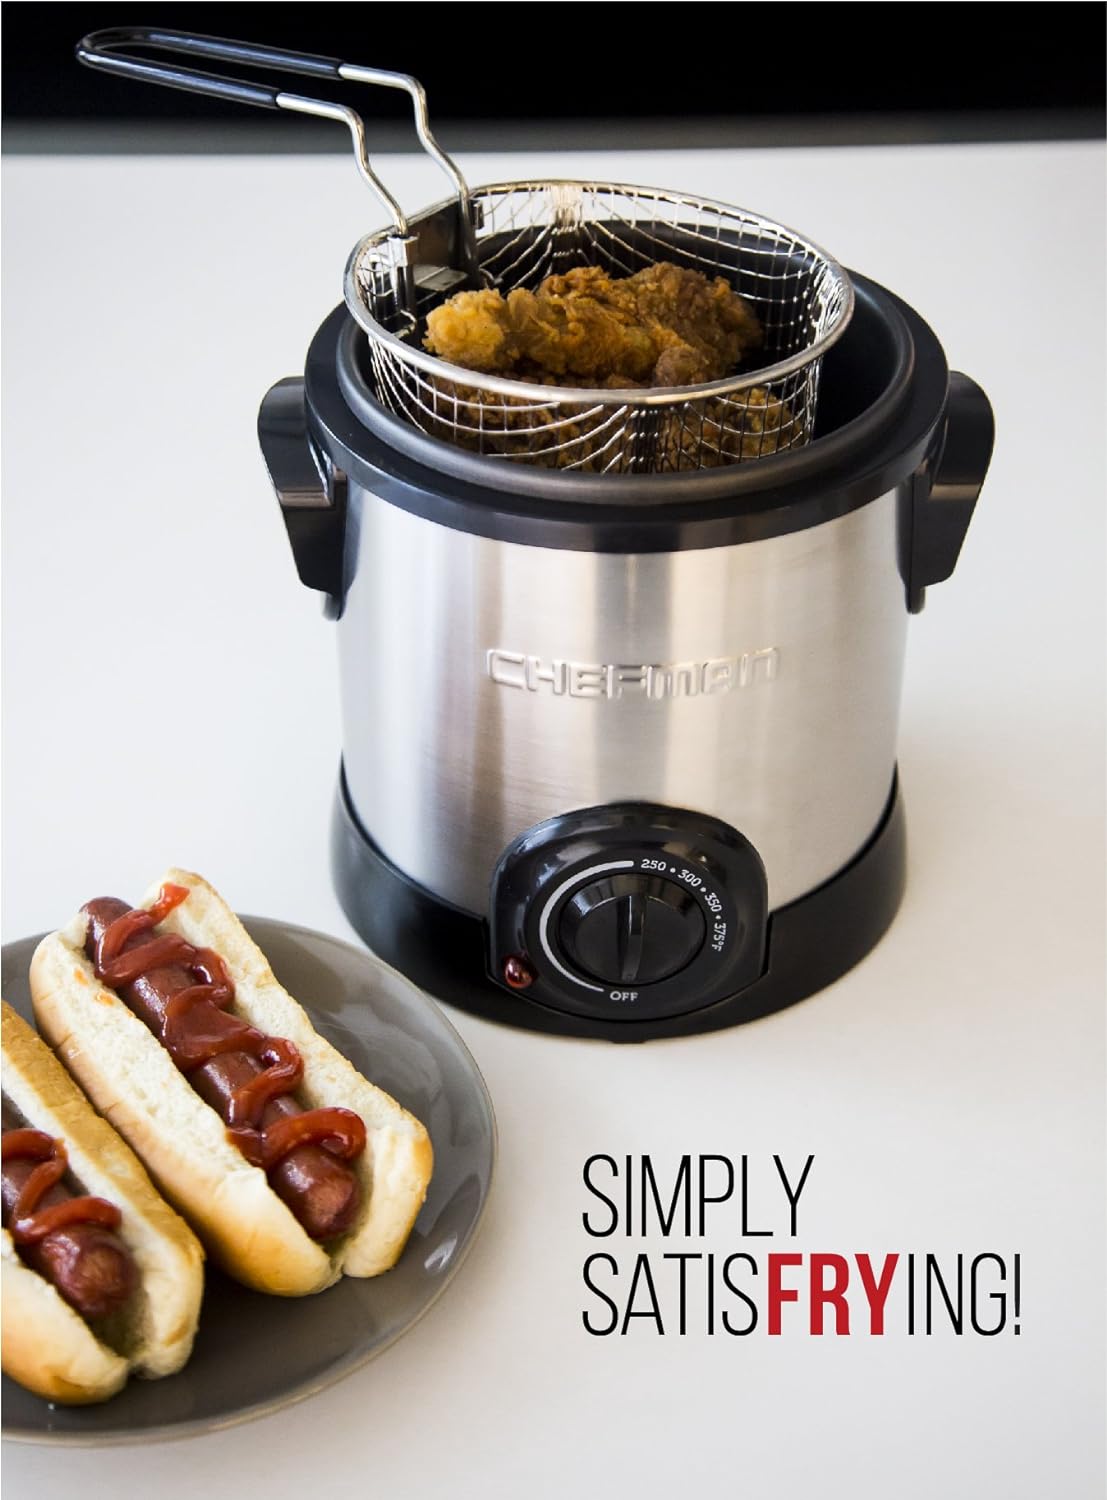 Chefman Fry Guy, The Most Compact  Convenient To Deep Fry Comfort Food, Restaurant-Style Basket With A 1.6-Quart Capacity, Easy-View Window  Adjustable Temp Control, Stainless - 1.5 Liter